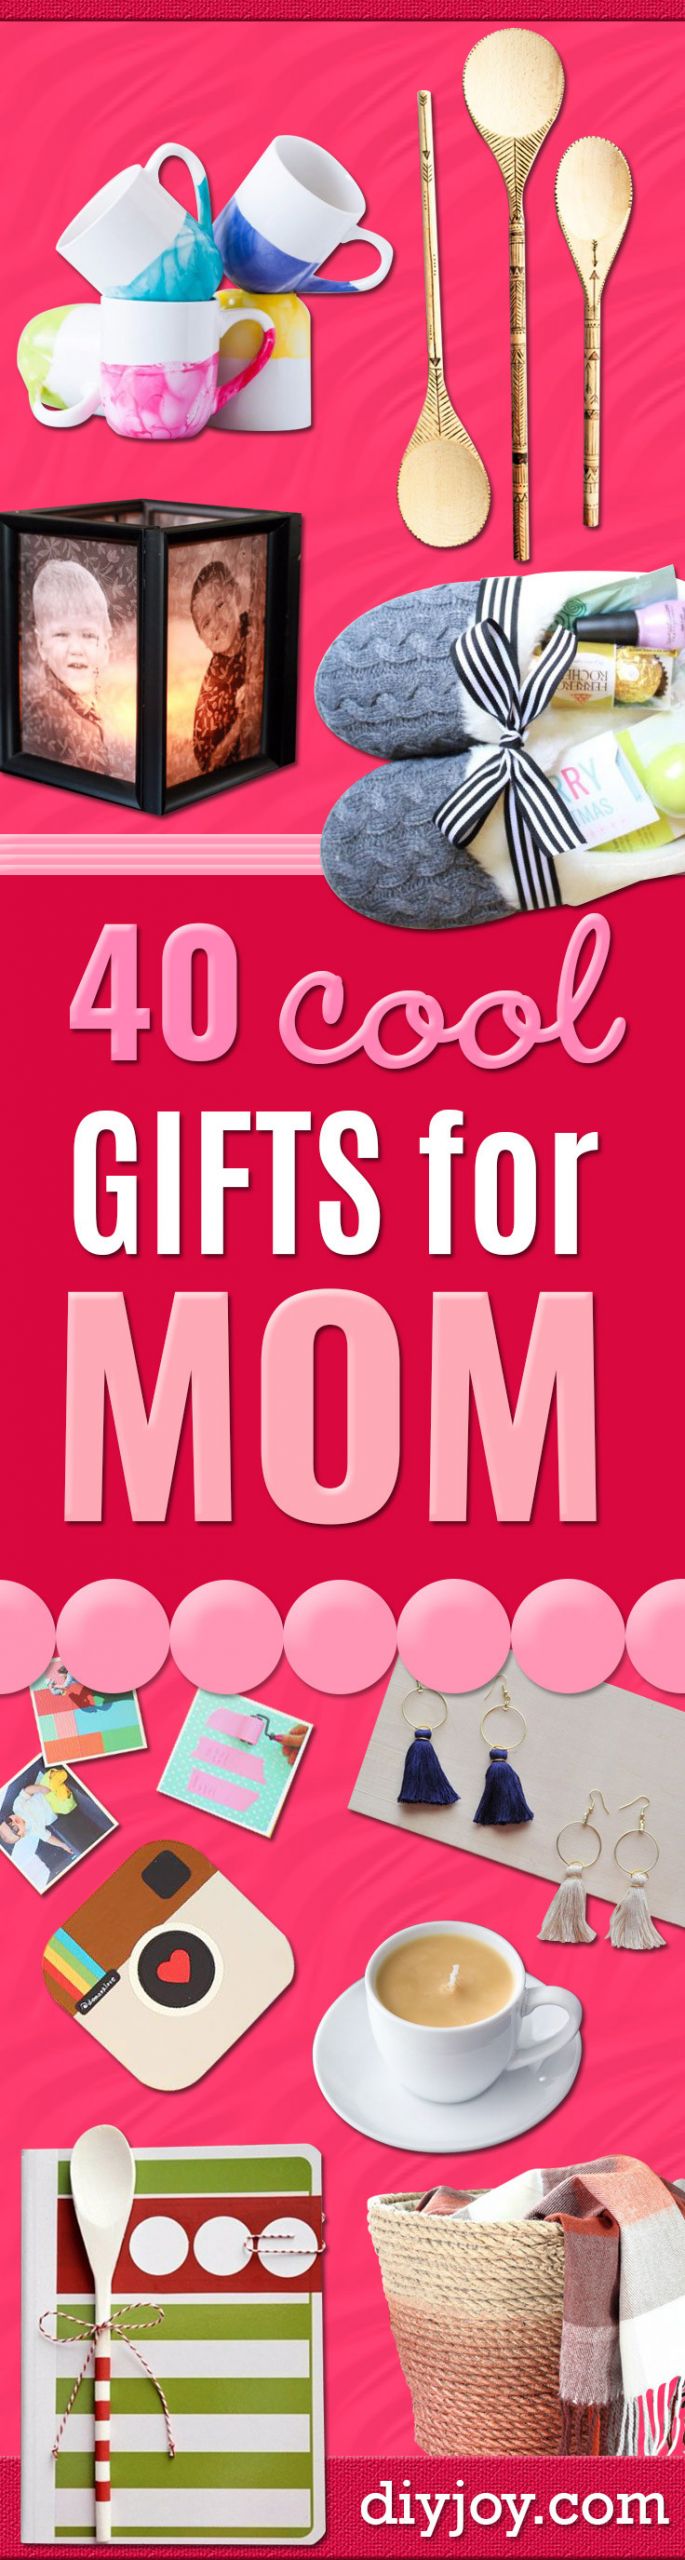 DIY Christmas Gifts For Mom
 40 Coolest Gifts To Make for Mom